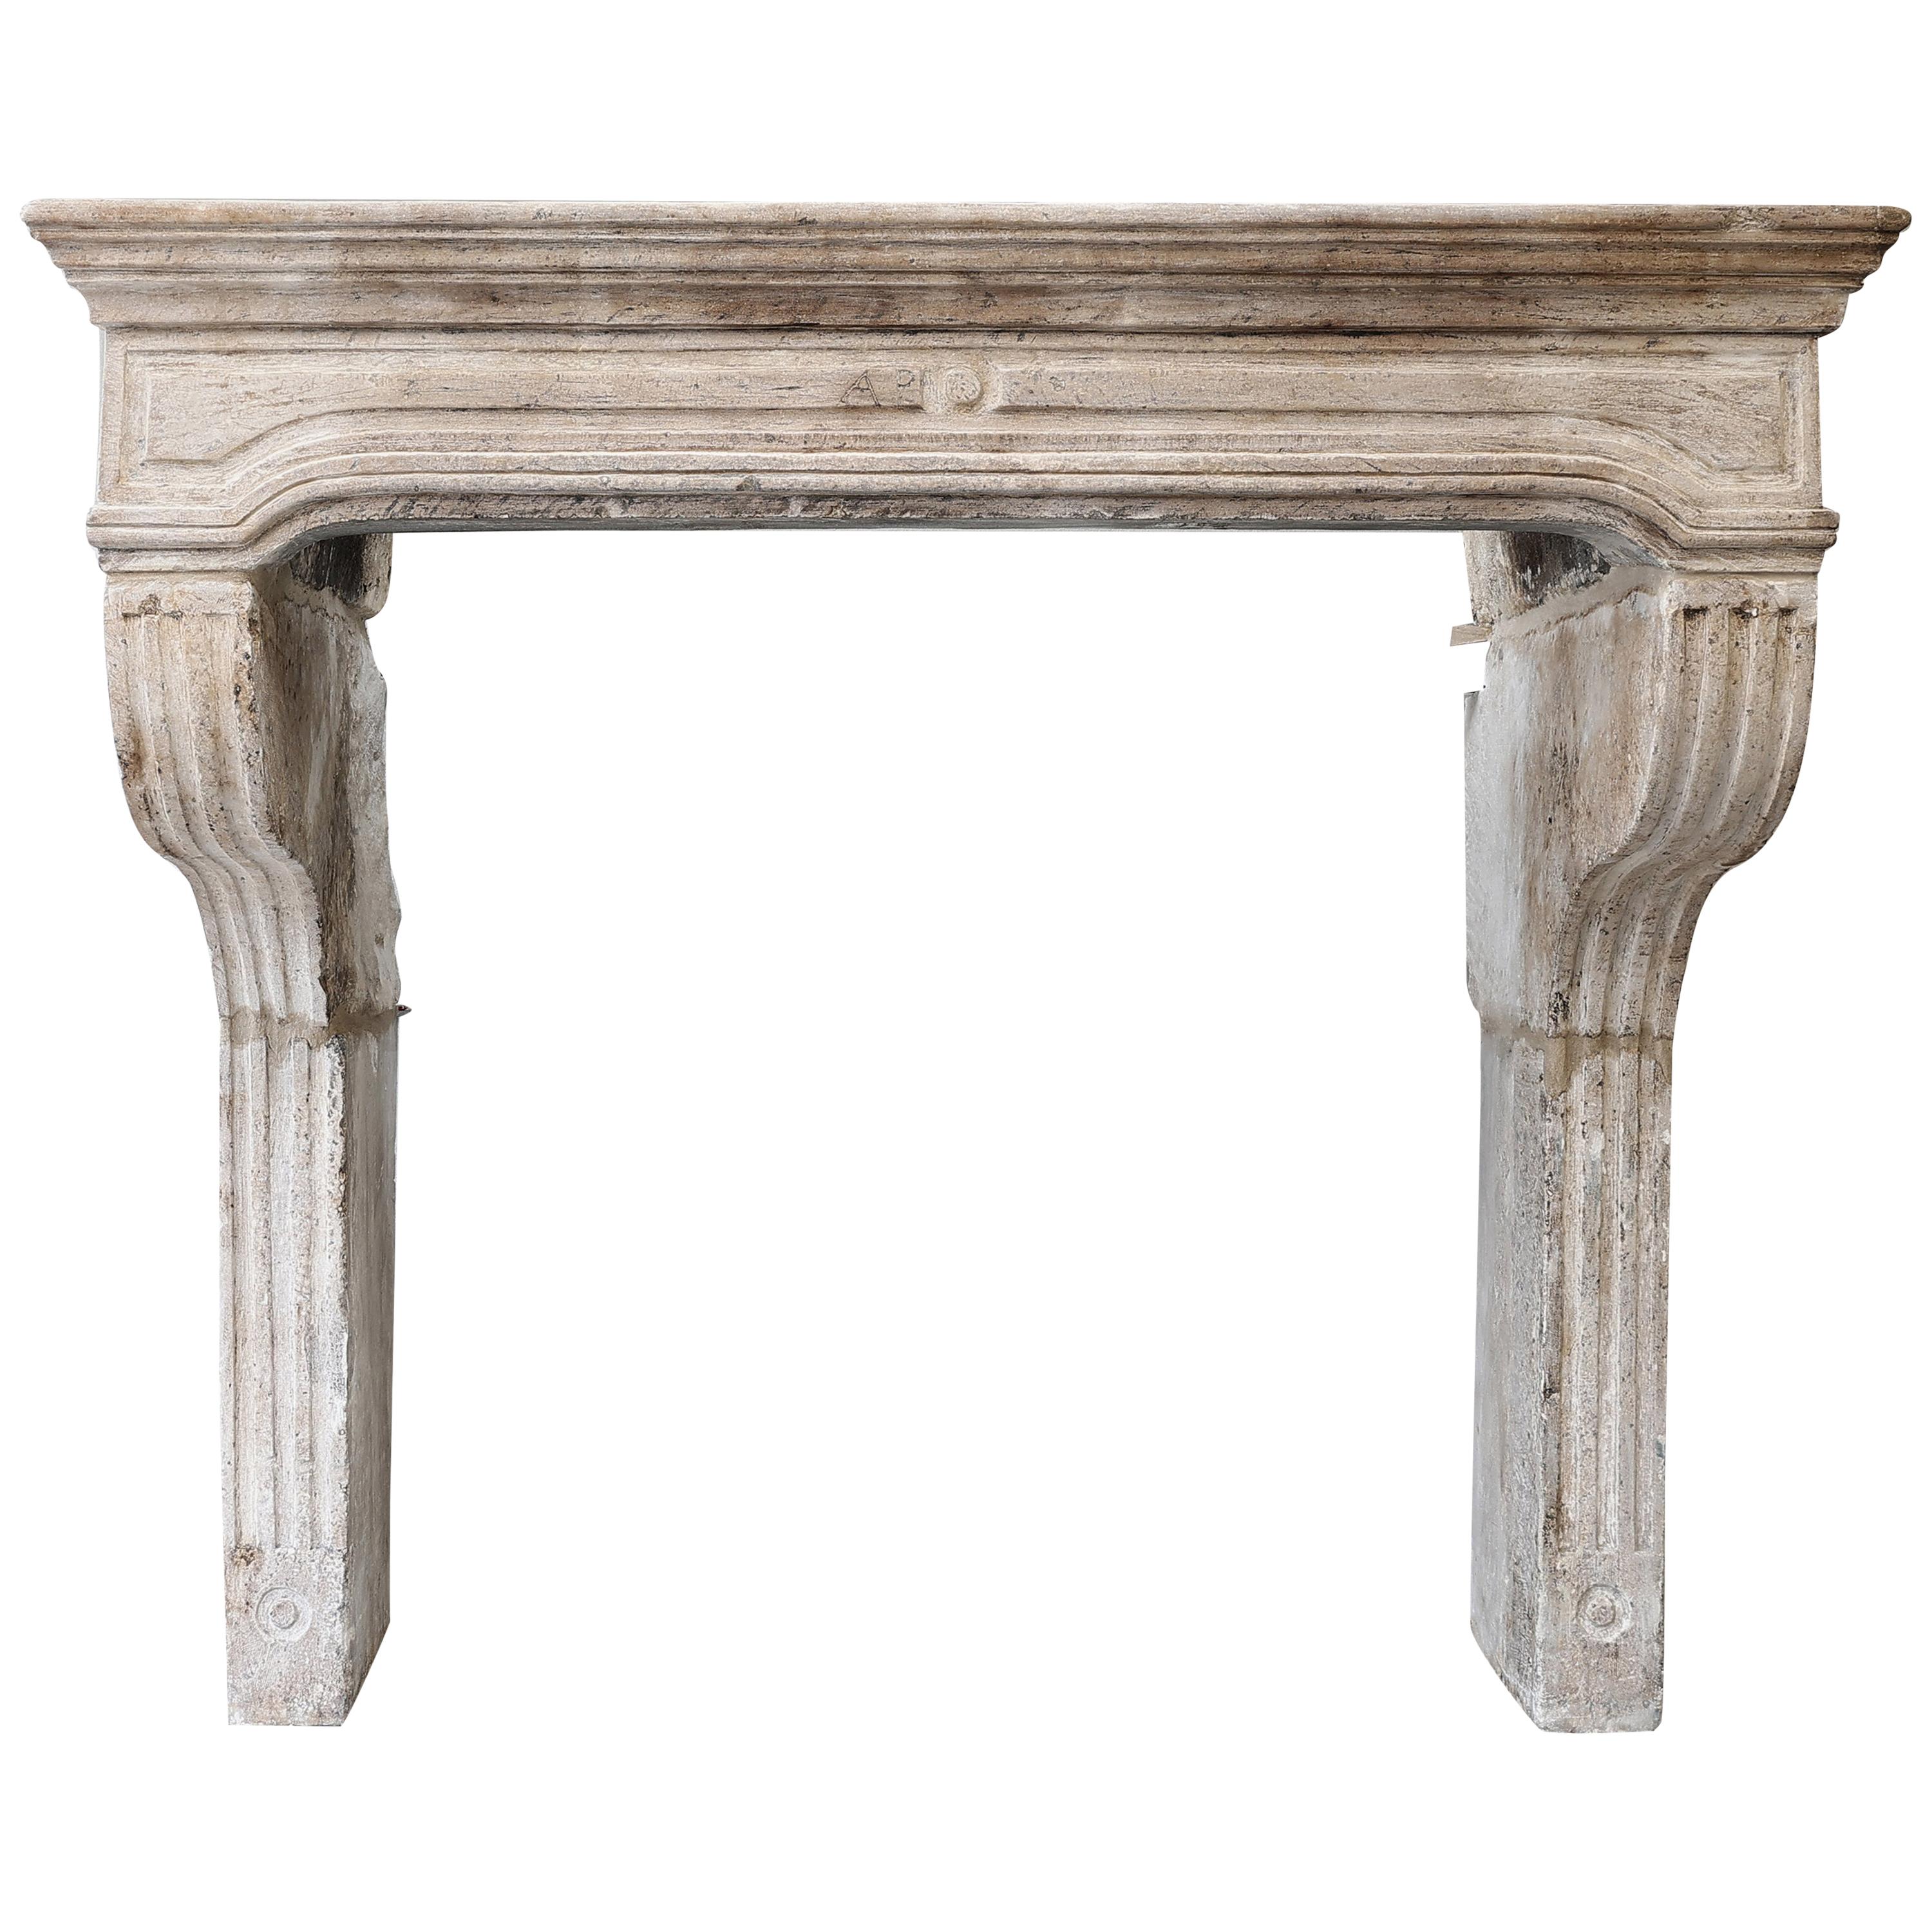 Antique Mantle of French Limestone in Campagnarde Style from the 19th Century